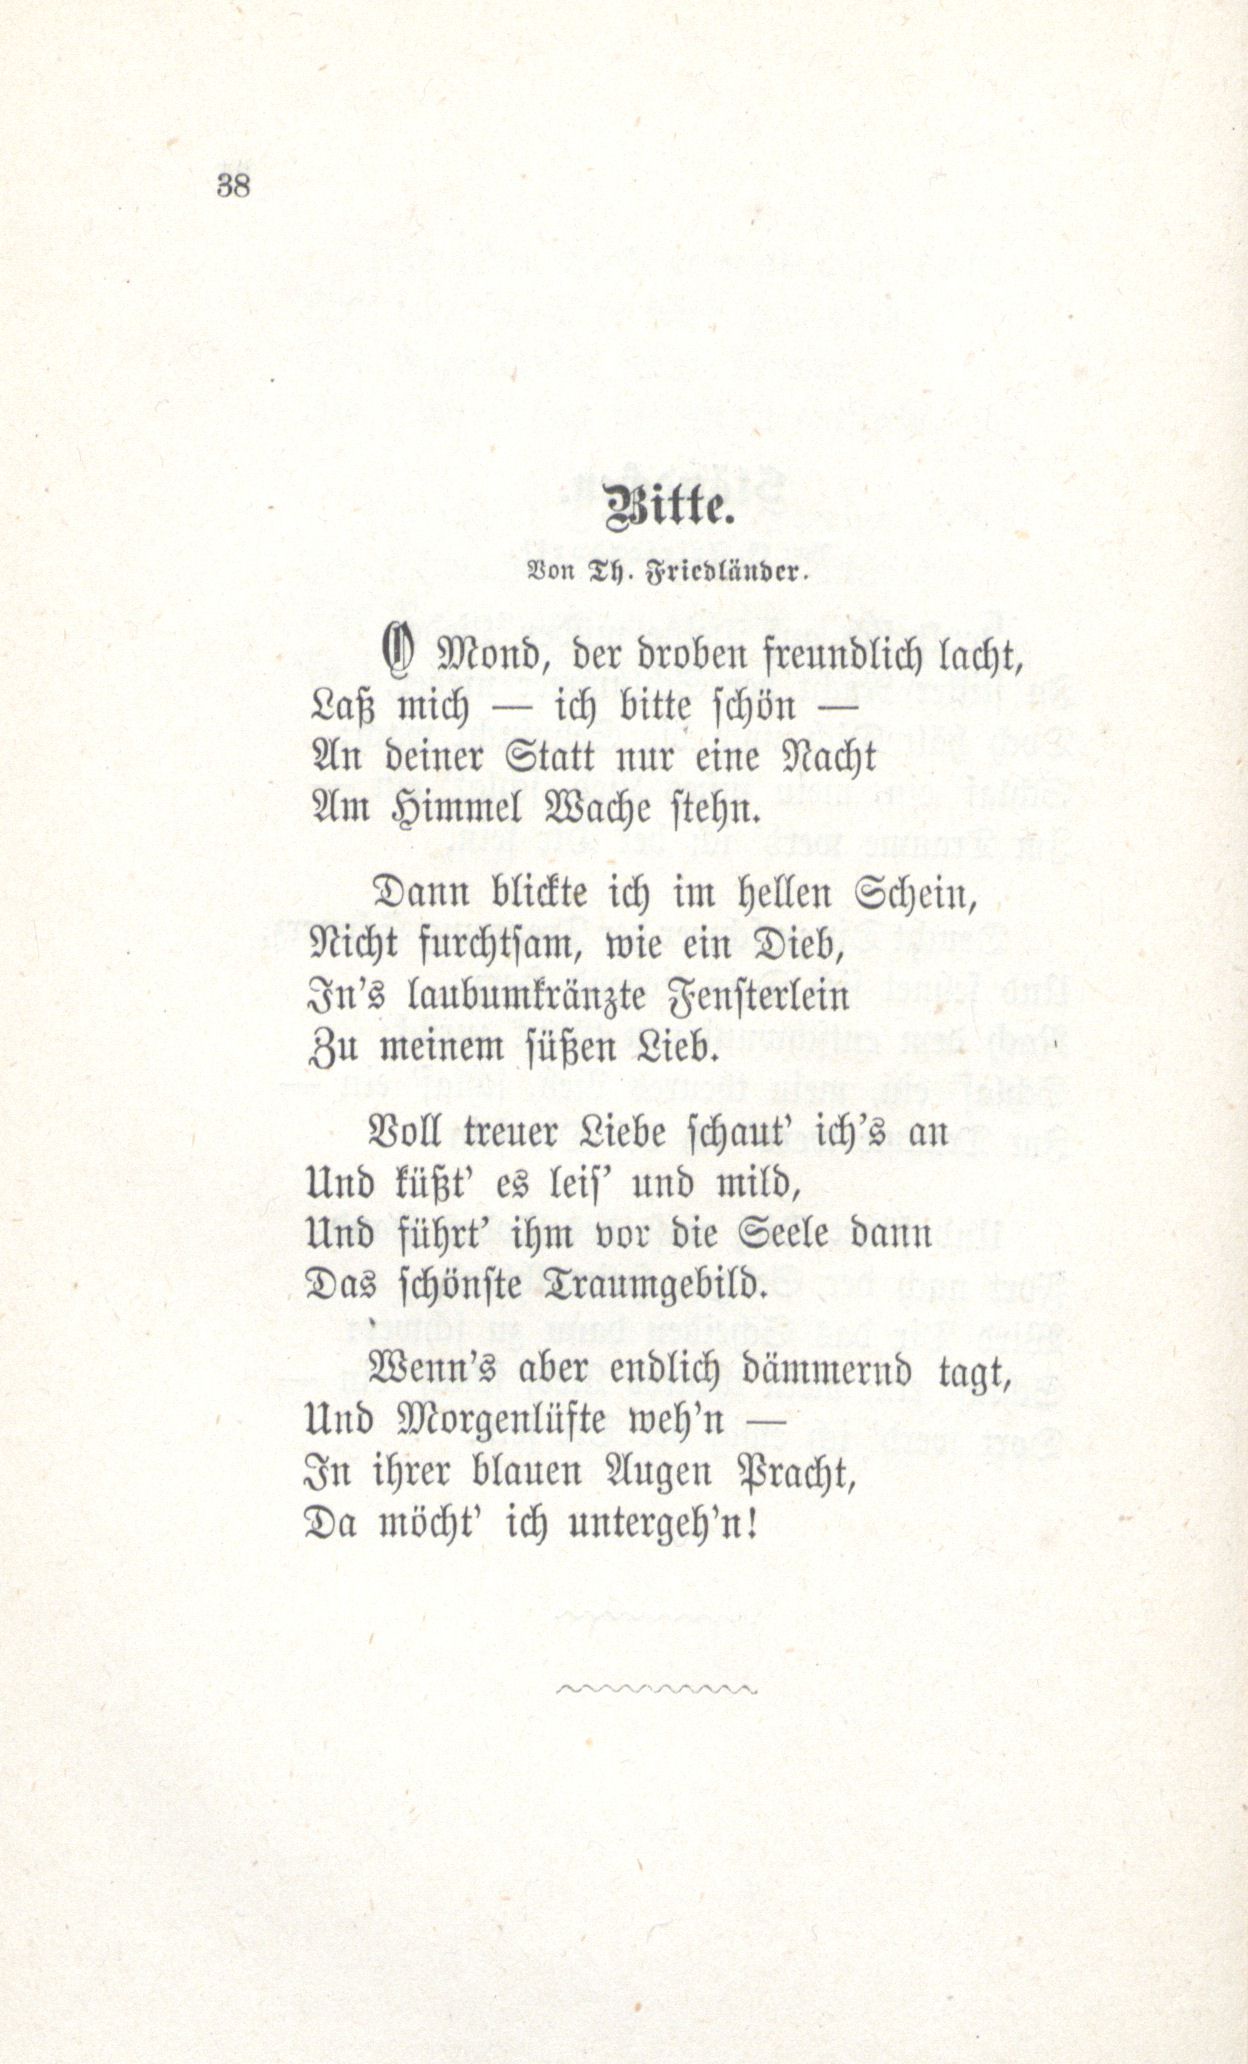 Bitte (1880) | 1. (38) Main body of text